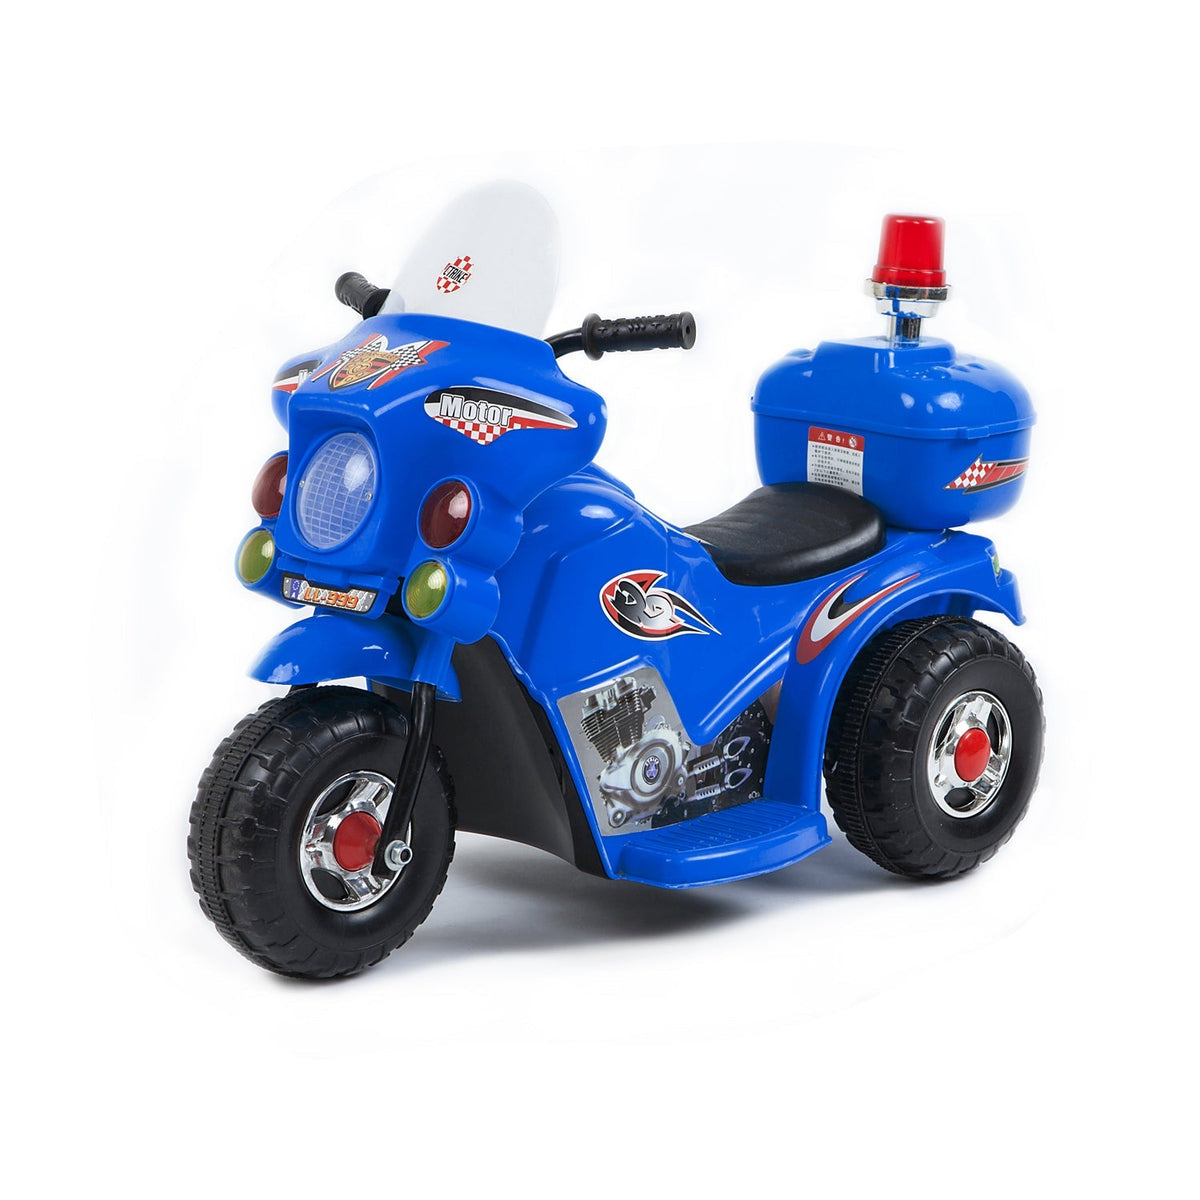 Blue Children's Electric Ride-on Motorcycle.